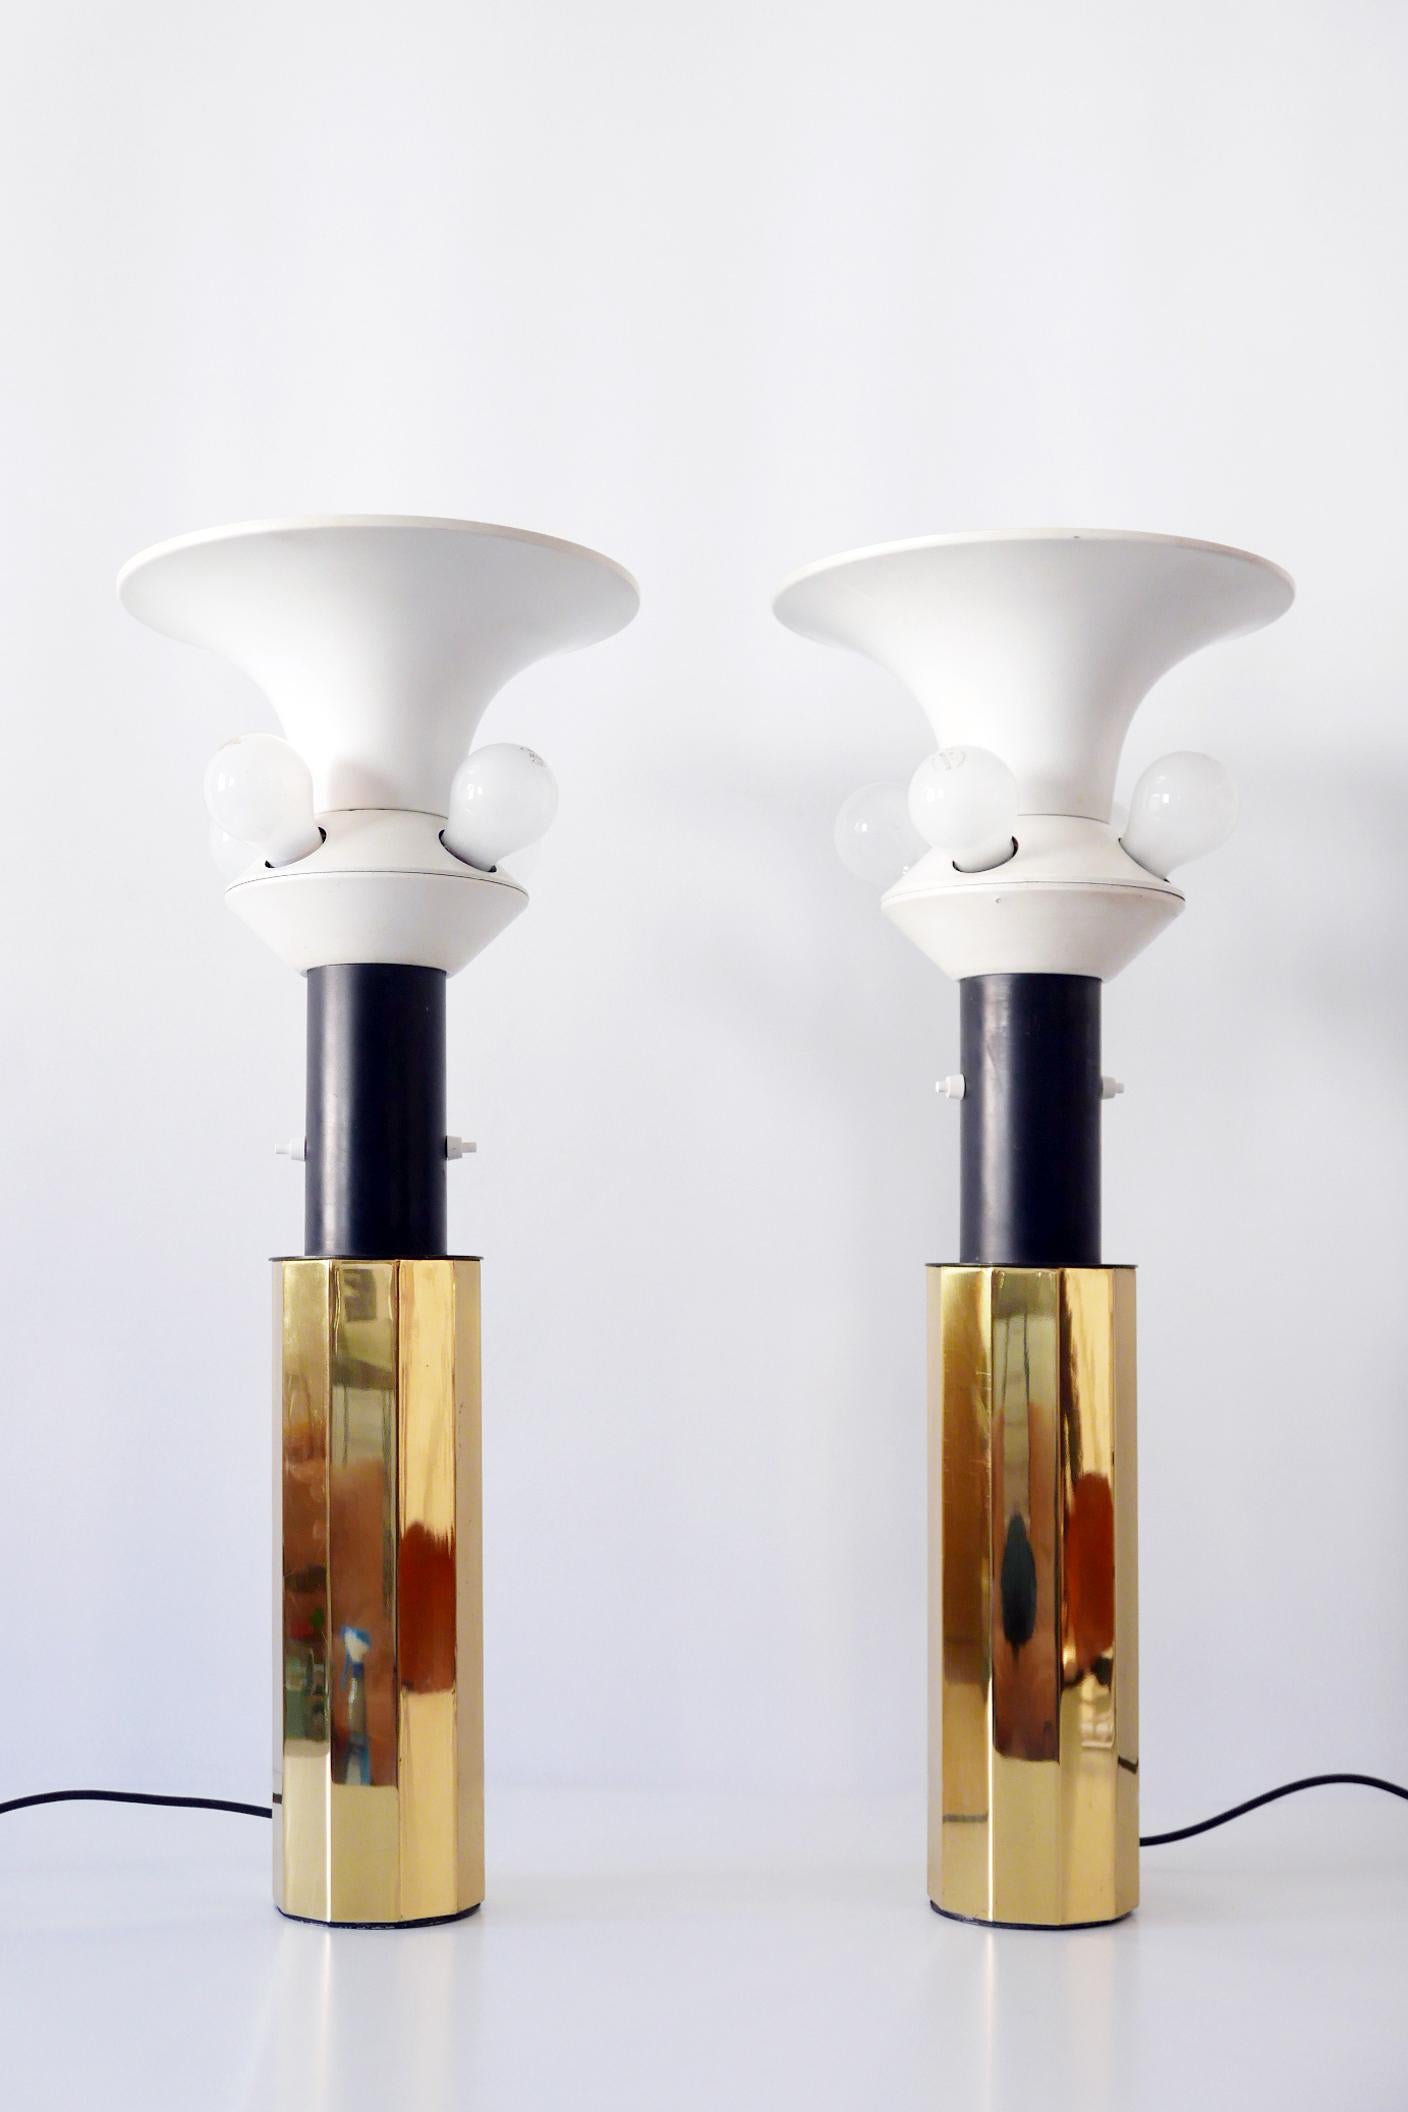 Set of Two Huge, 5-Flamed Midcentury Decagonal Brass Table Lamps, 1960s, Germany For Sale 3